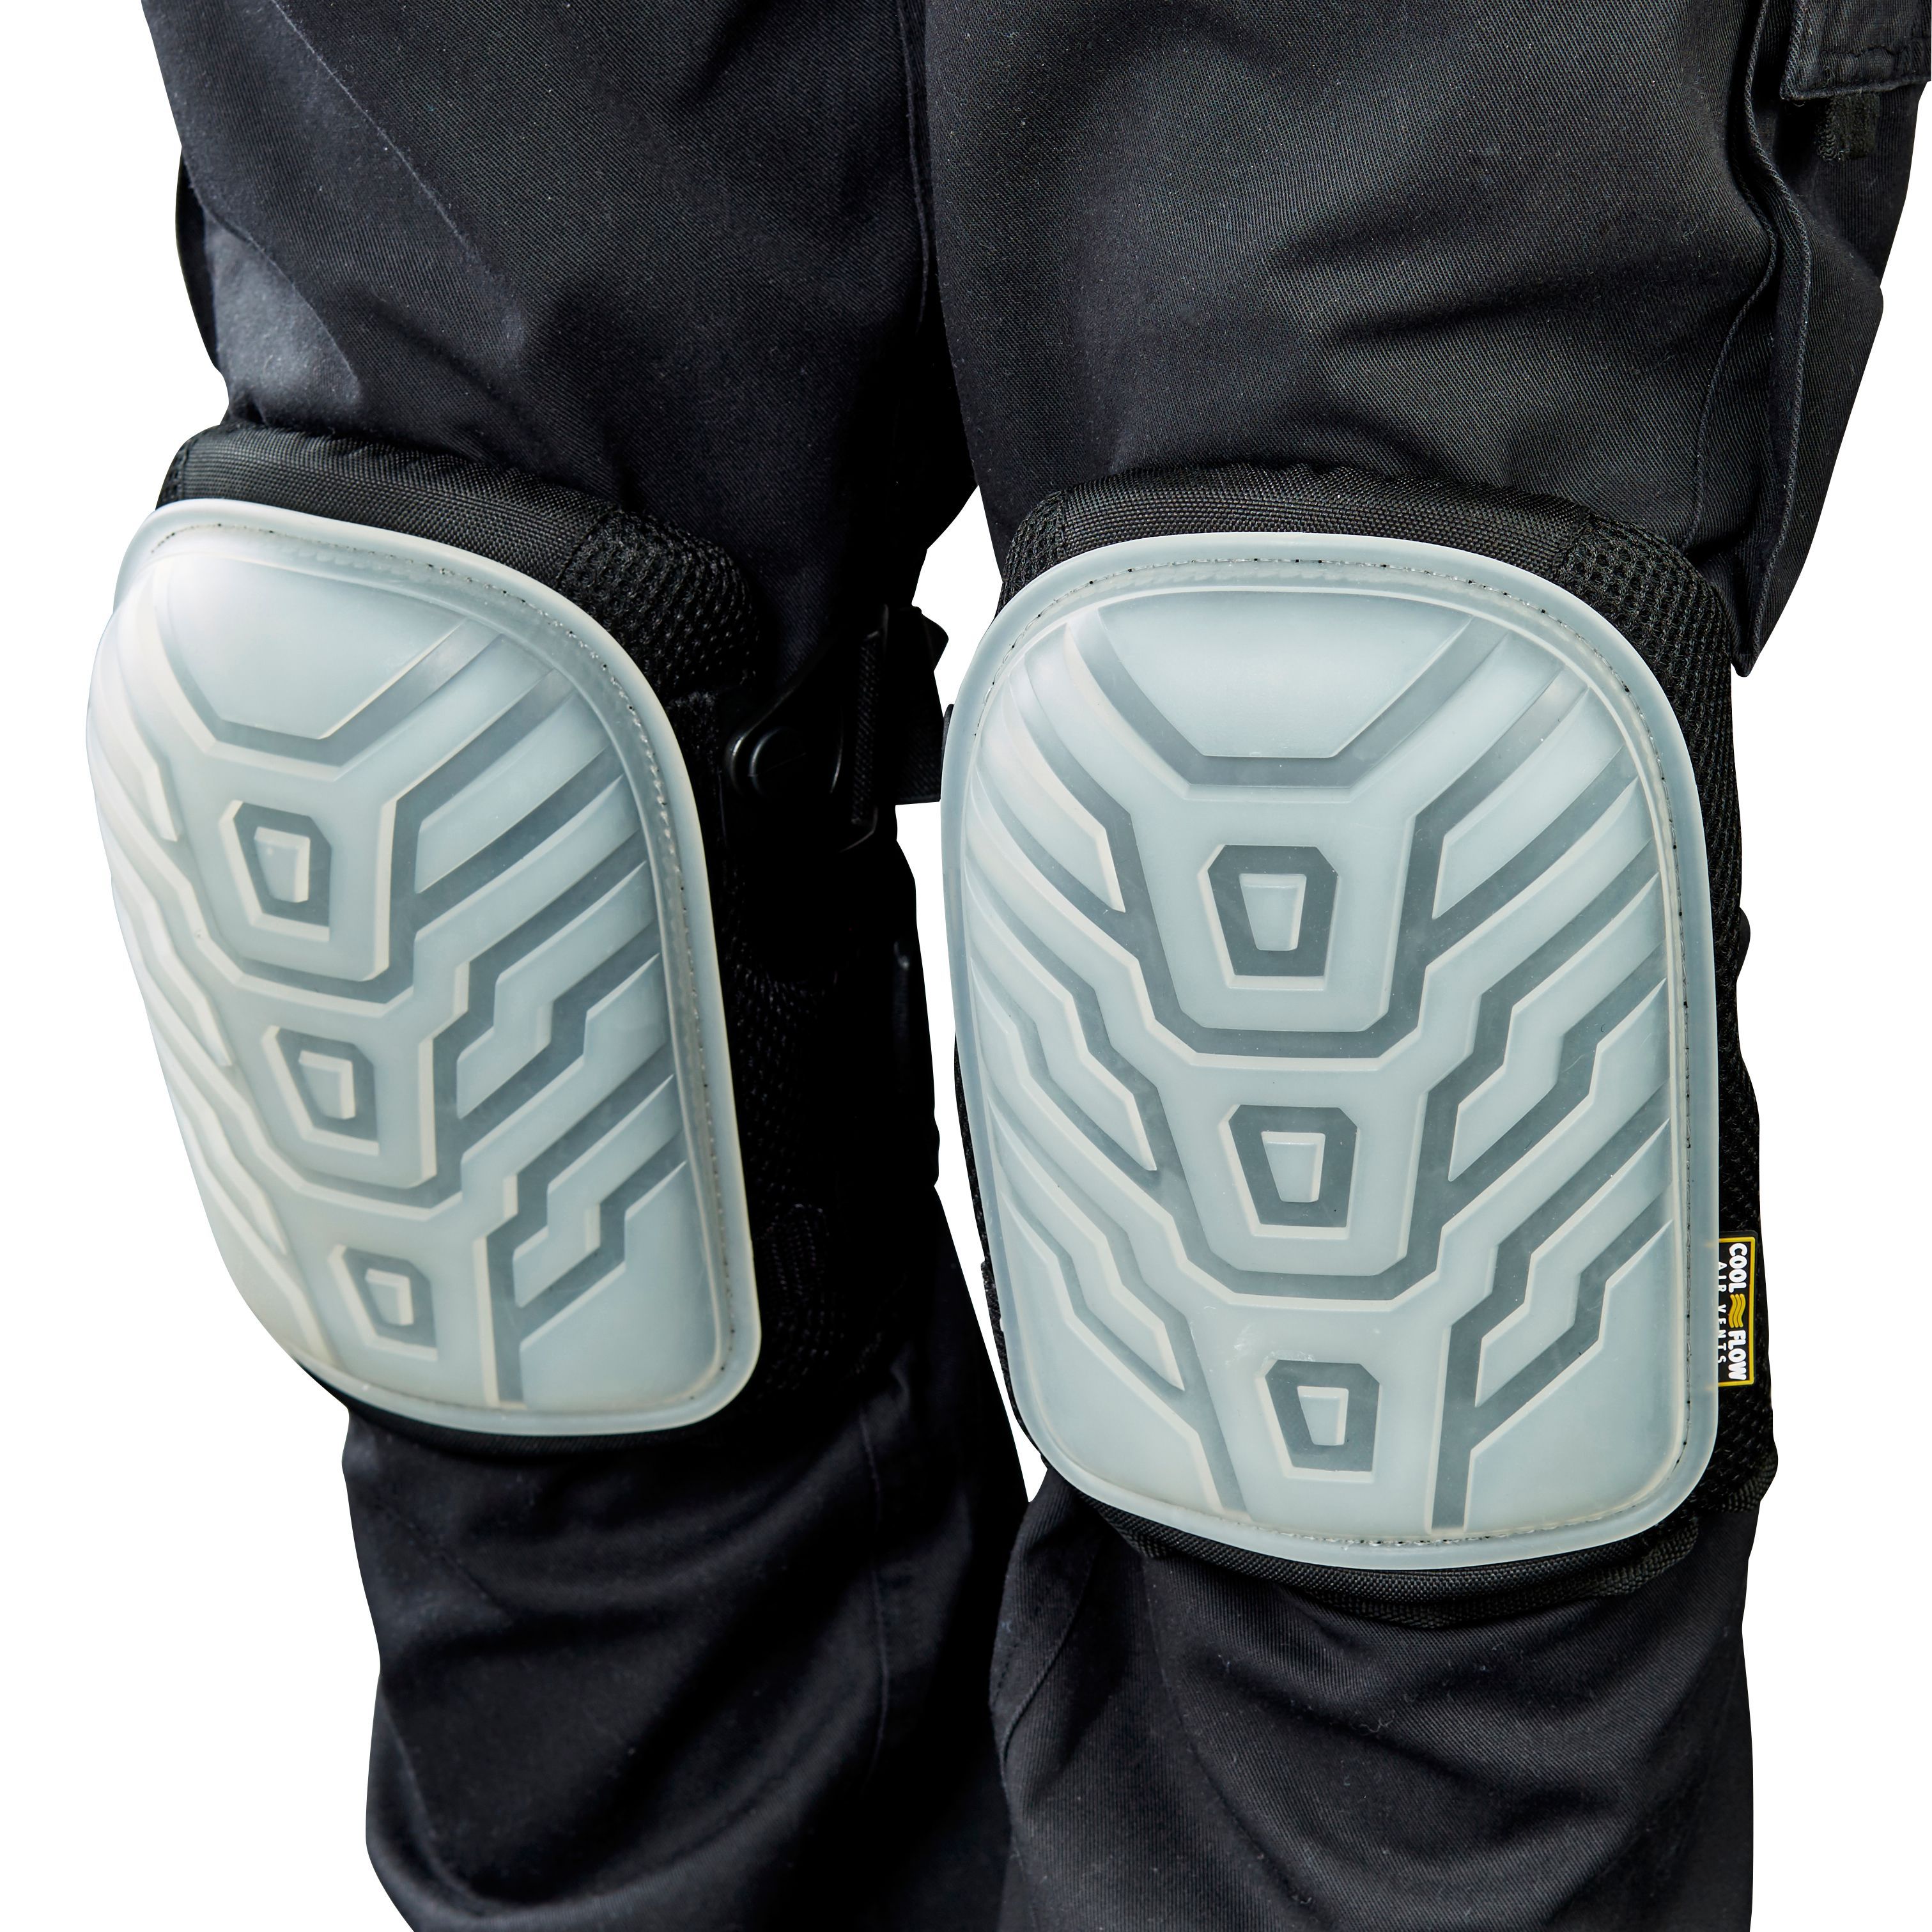 Site Black Knee pads One size SKN502, Pair of 2